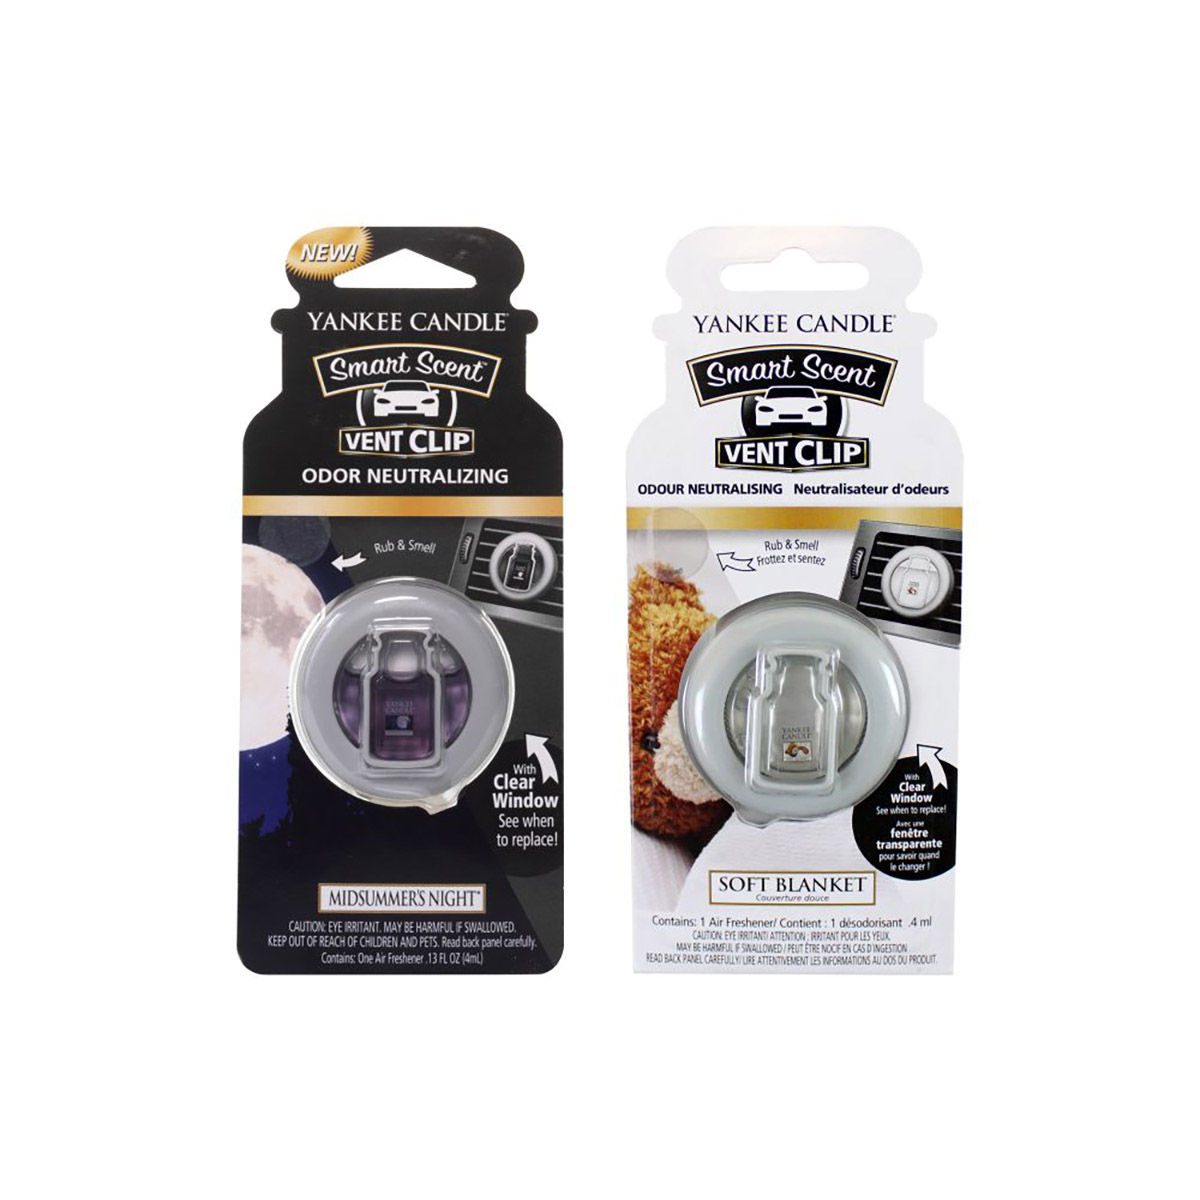 Yankee Candle Smart Scent Vent Clip Air Freshener- Pk of 2- Midsummers Night and Soft Blanket